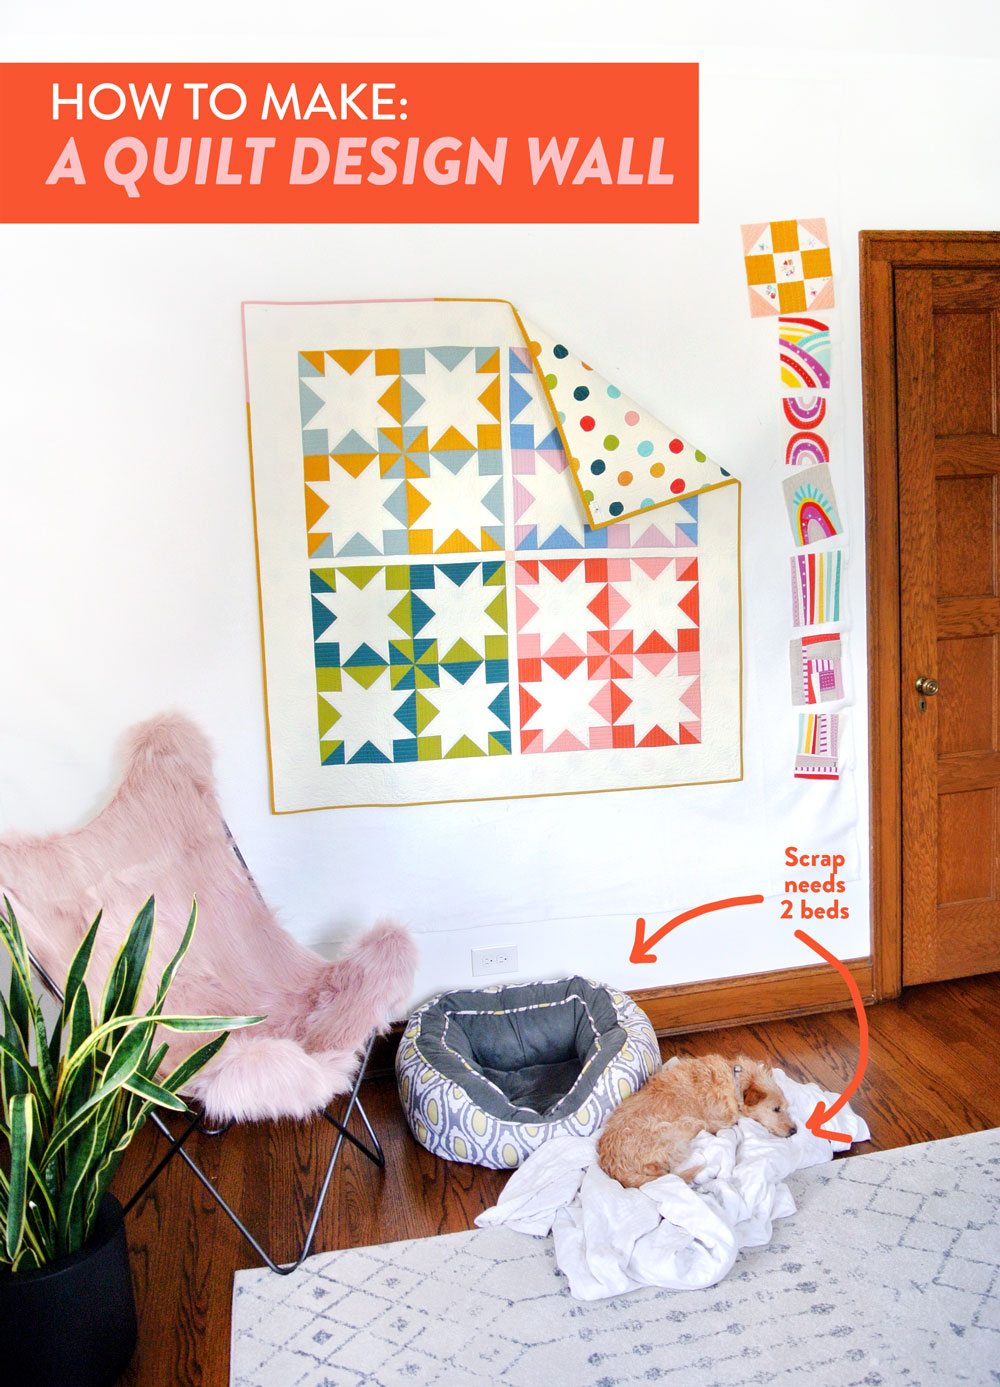 How to Make a Quilt Design Wall | Suzy Quilts https://suzyquilts.com/how-to-make-quilt-design-wall